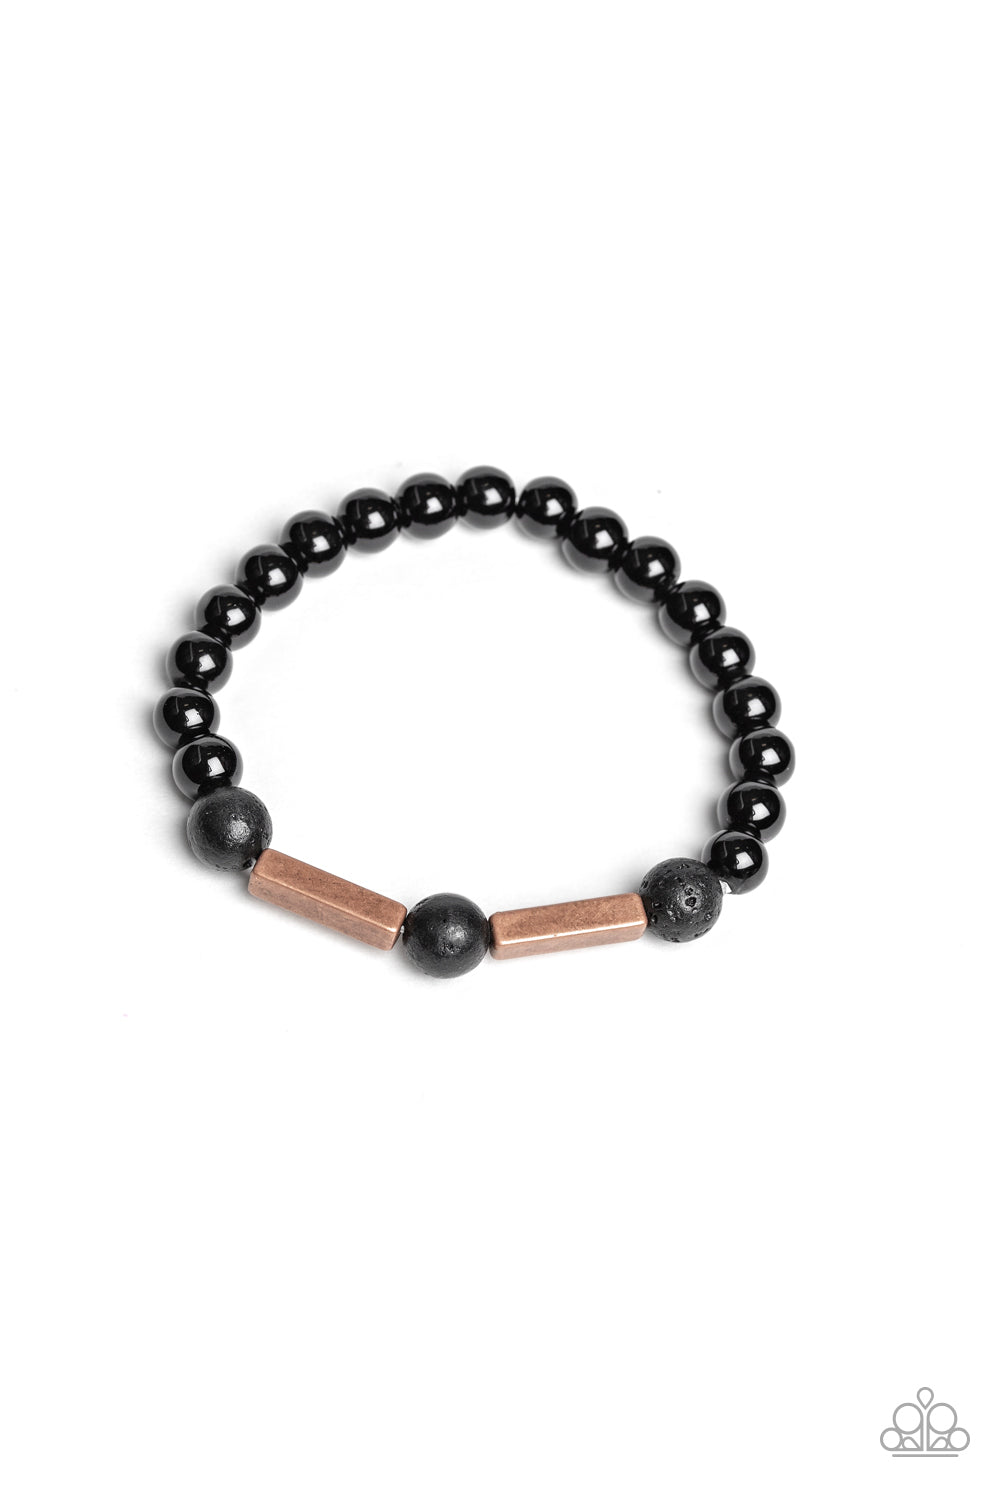 &lt;P&gt;An earthy collection of rectangular copper accents, round black lava rock beads, and shiny black beads are threaded along a stretchy band around the wrist for a seasonal look.&lt;/P&gt;  

&lt;P&gt; &lt;I&gt;Sold as one individual bracelet.&lt;/I&gt;  &lt;/P&gt;


&lt;img src=\&quot;https://d9b54x484lq62.cloudfront.net/paparazzi/shopping/images/517_tag150x115_1.png\&quot; alt=\&quot;New Kit\&quot; align=\&quot;middle\&quot; height=\&quot;50\&quot; width=\&quot;50\&quot;/&gt;